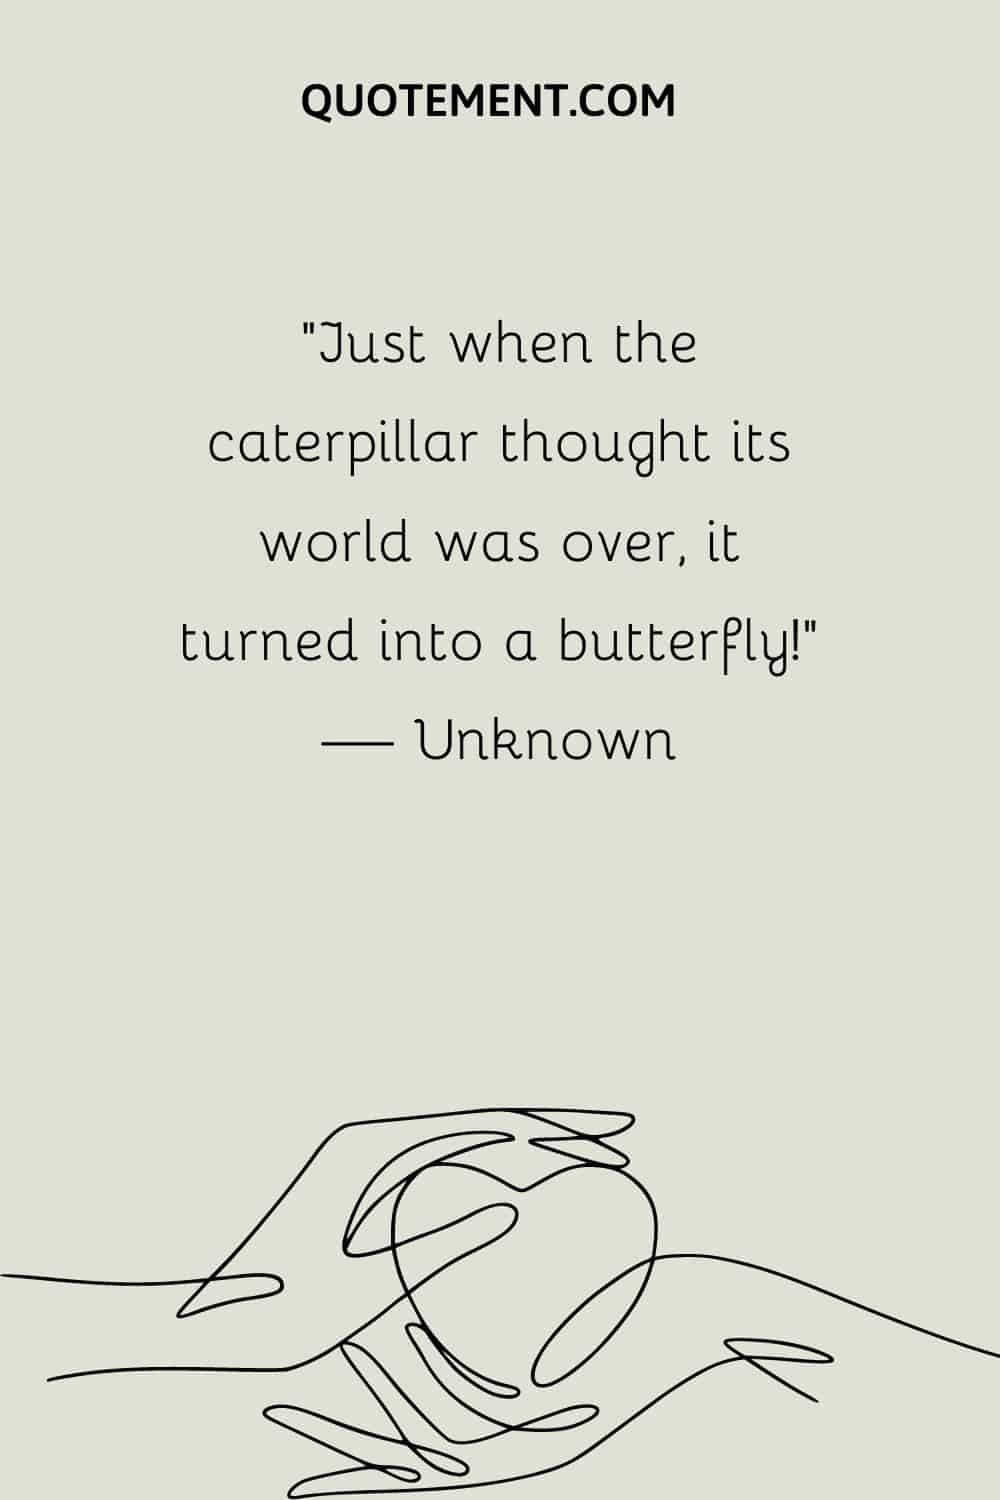 “Just when the caterpillar thought its world was over, it turned into a butterfly!” — Unknown